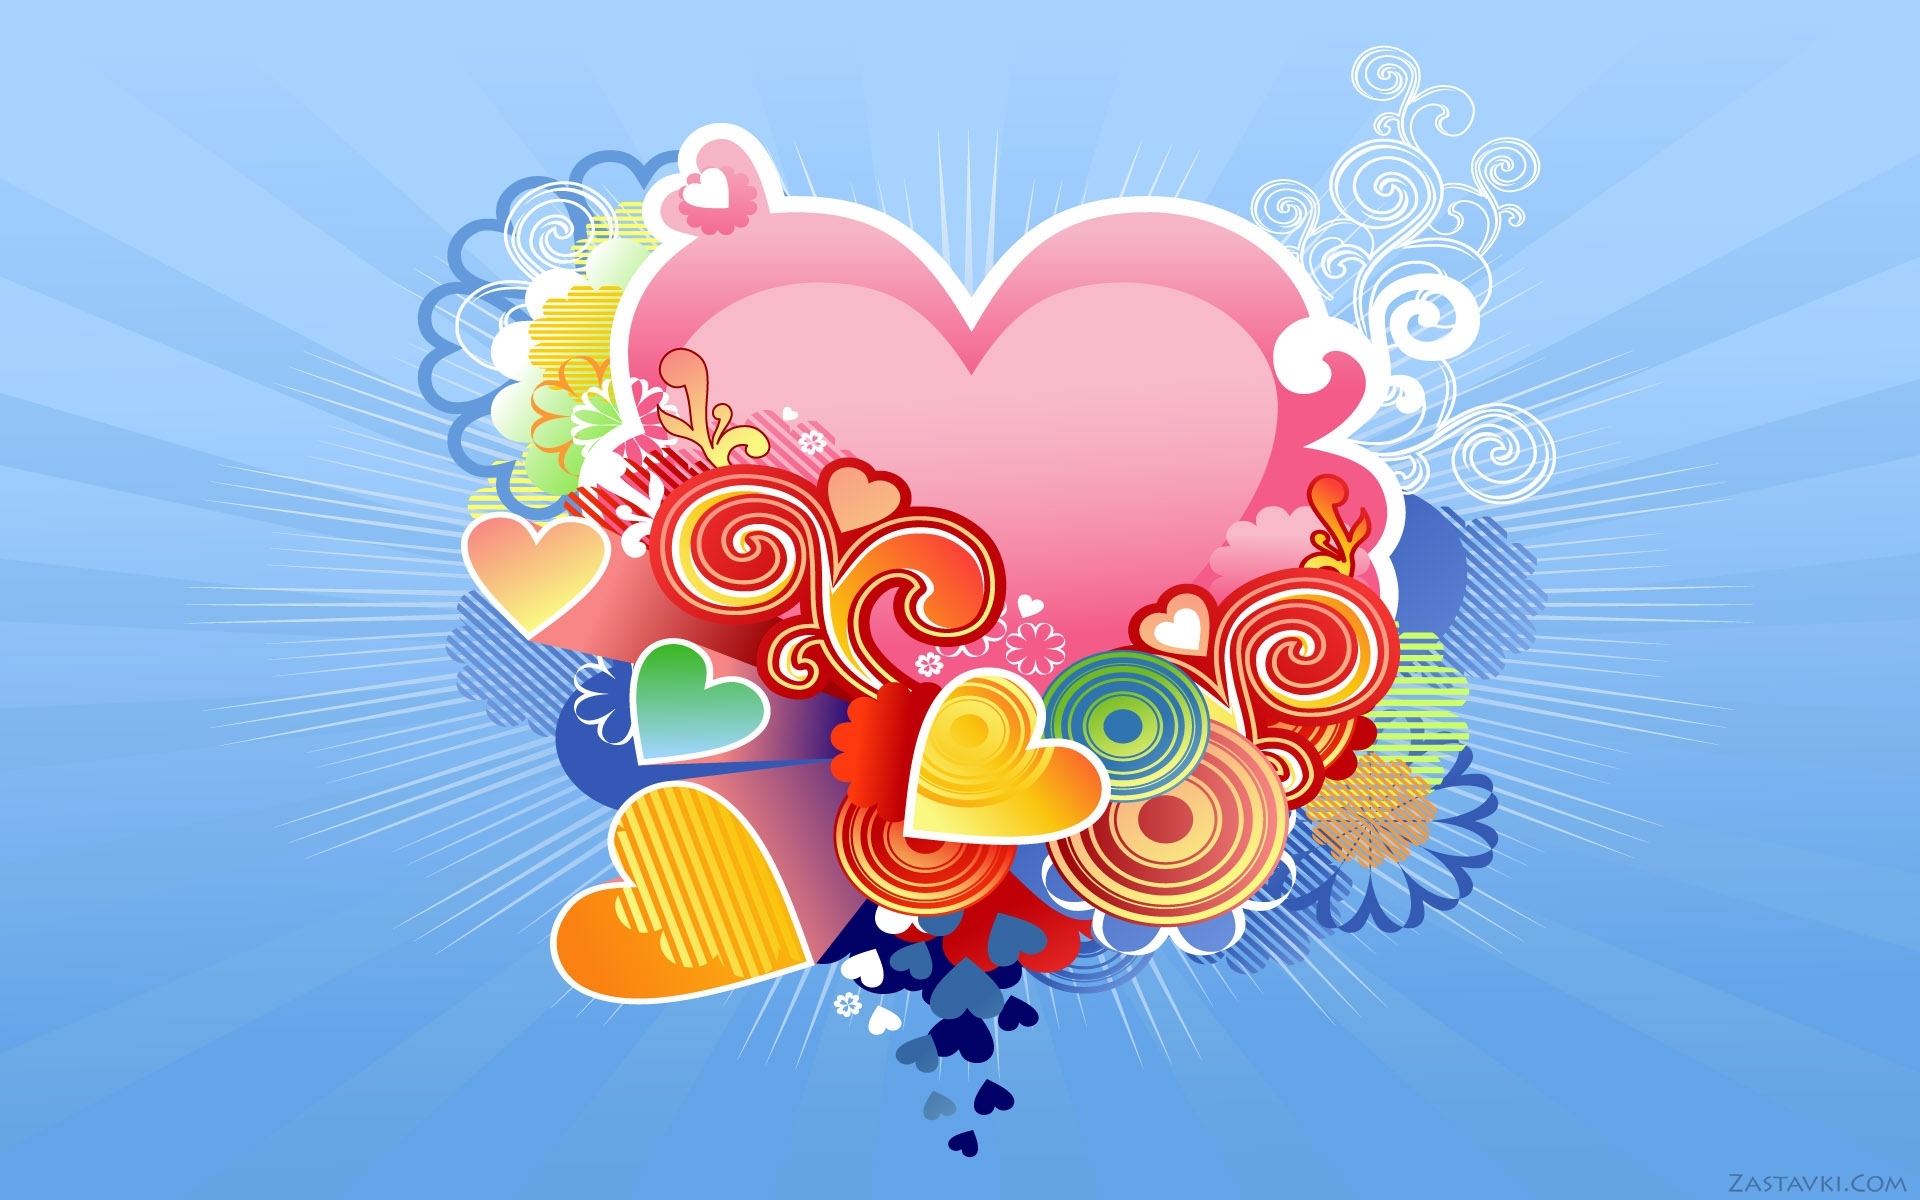 valentine's day, hearts, love, pictures Image for desktop